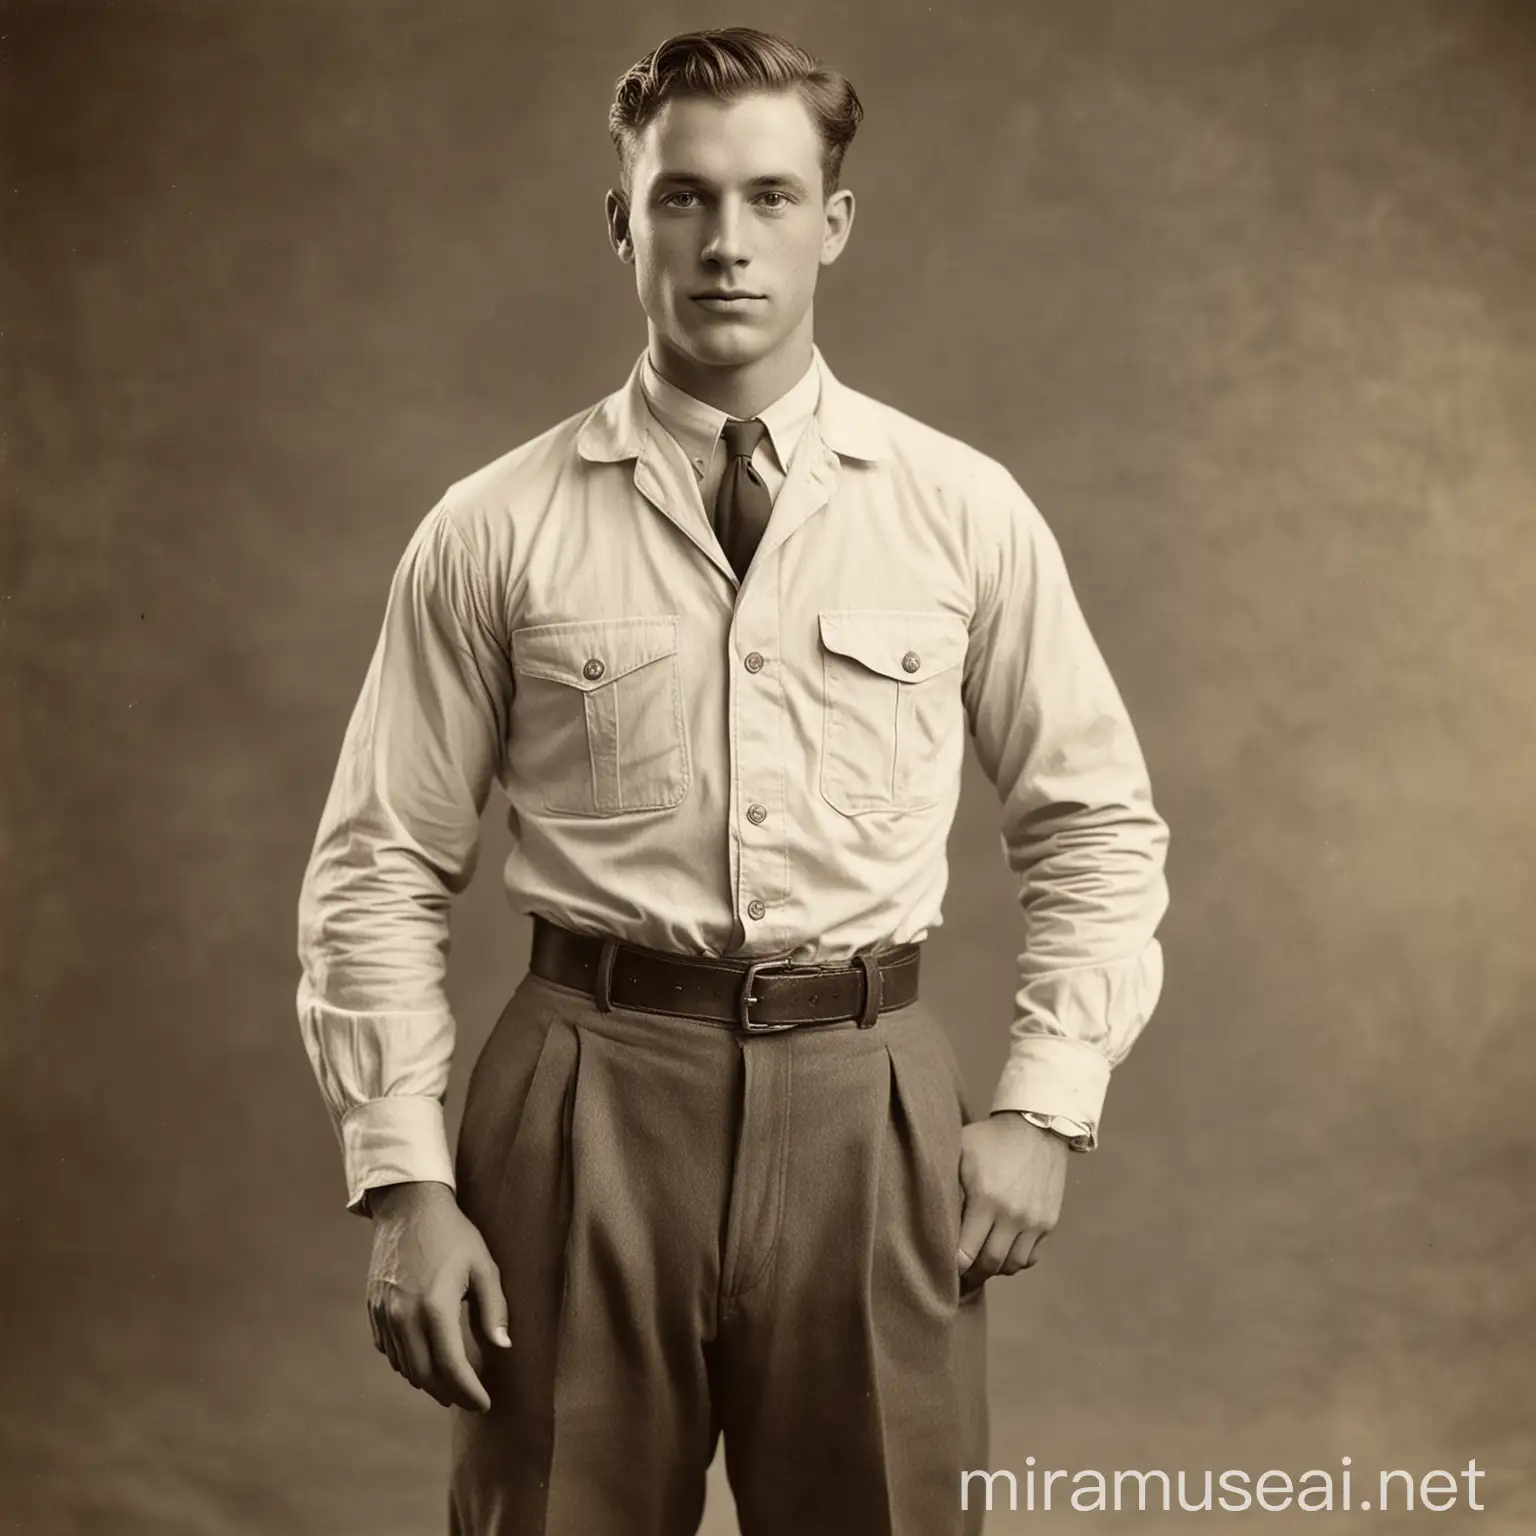 A photograph of a 28-year-old marine biologist, male wearing appropriate attire, photograph taken in 1926, perfect anatomy, perfect proportions